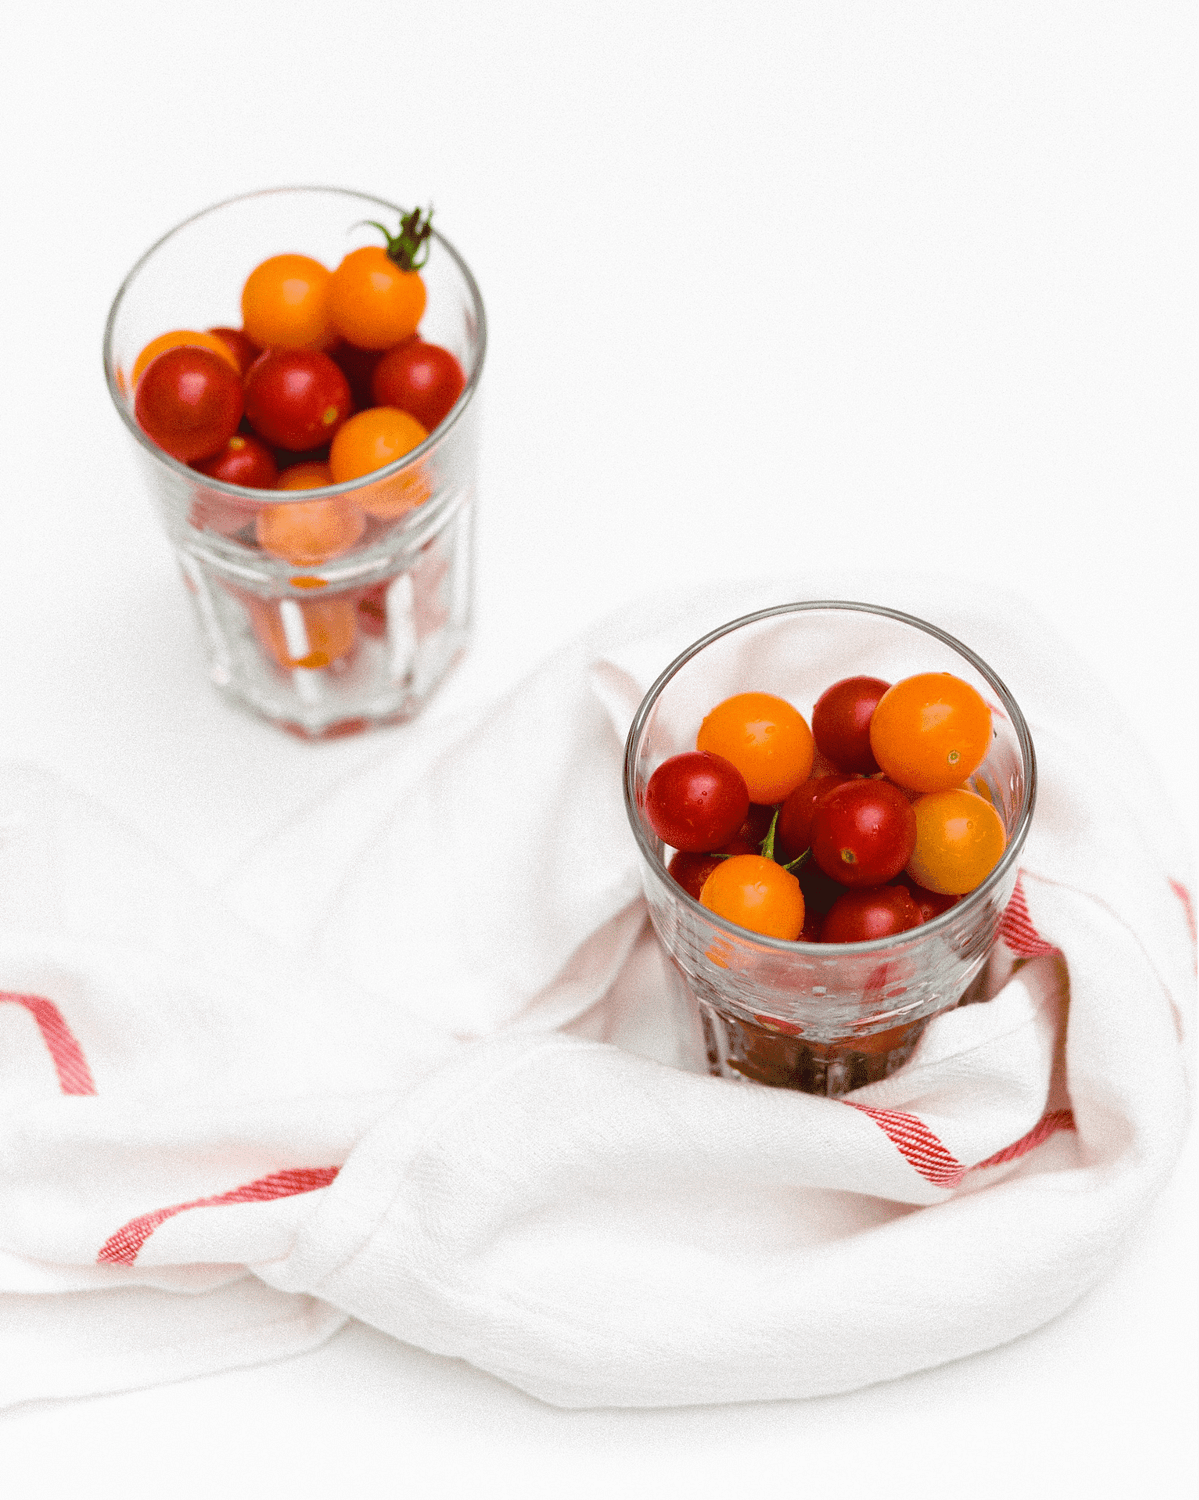 Two glass cups filled with grape tomatoes on a white table